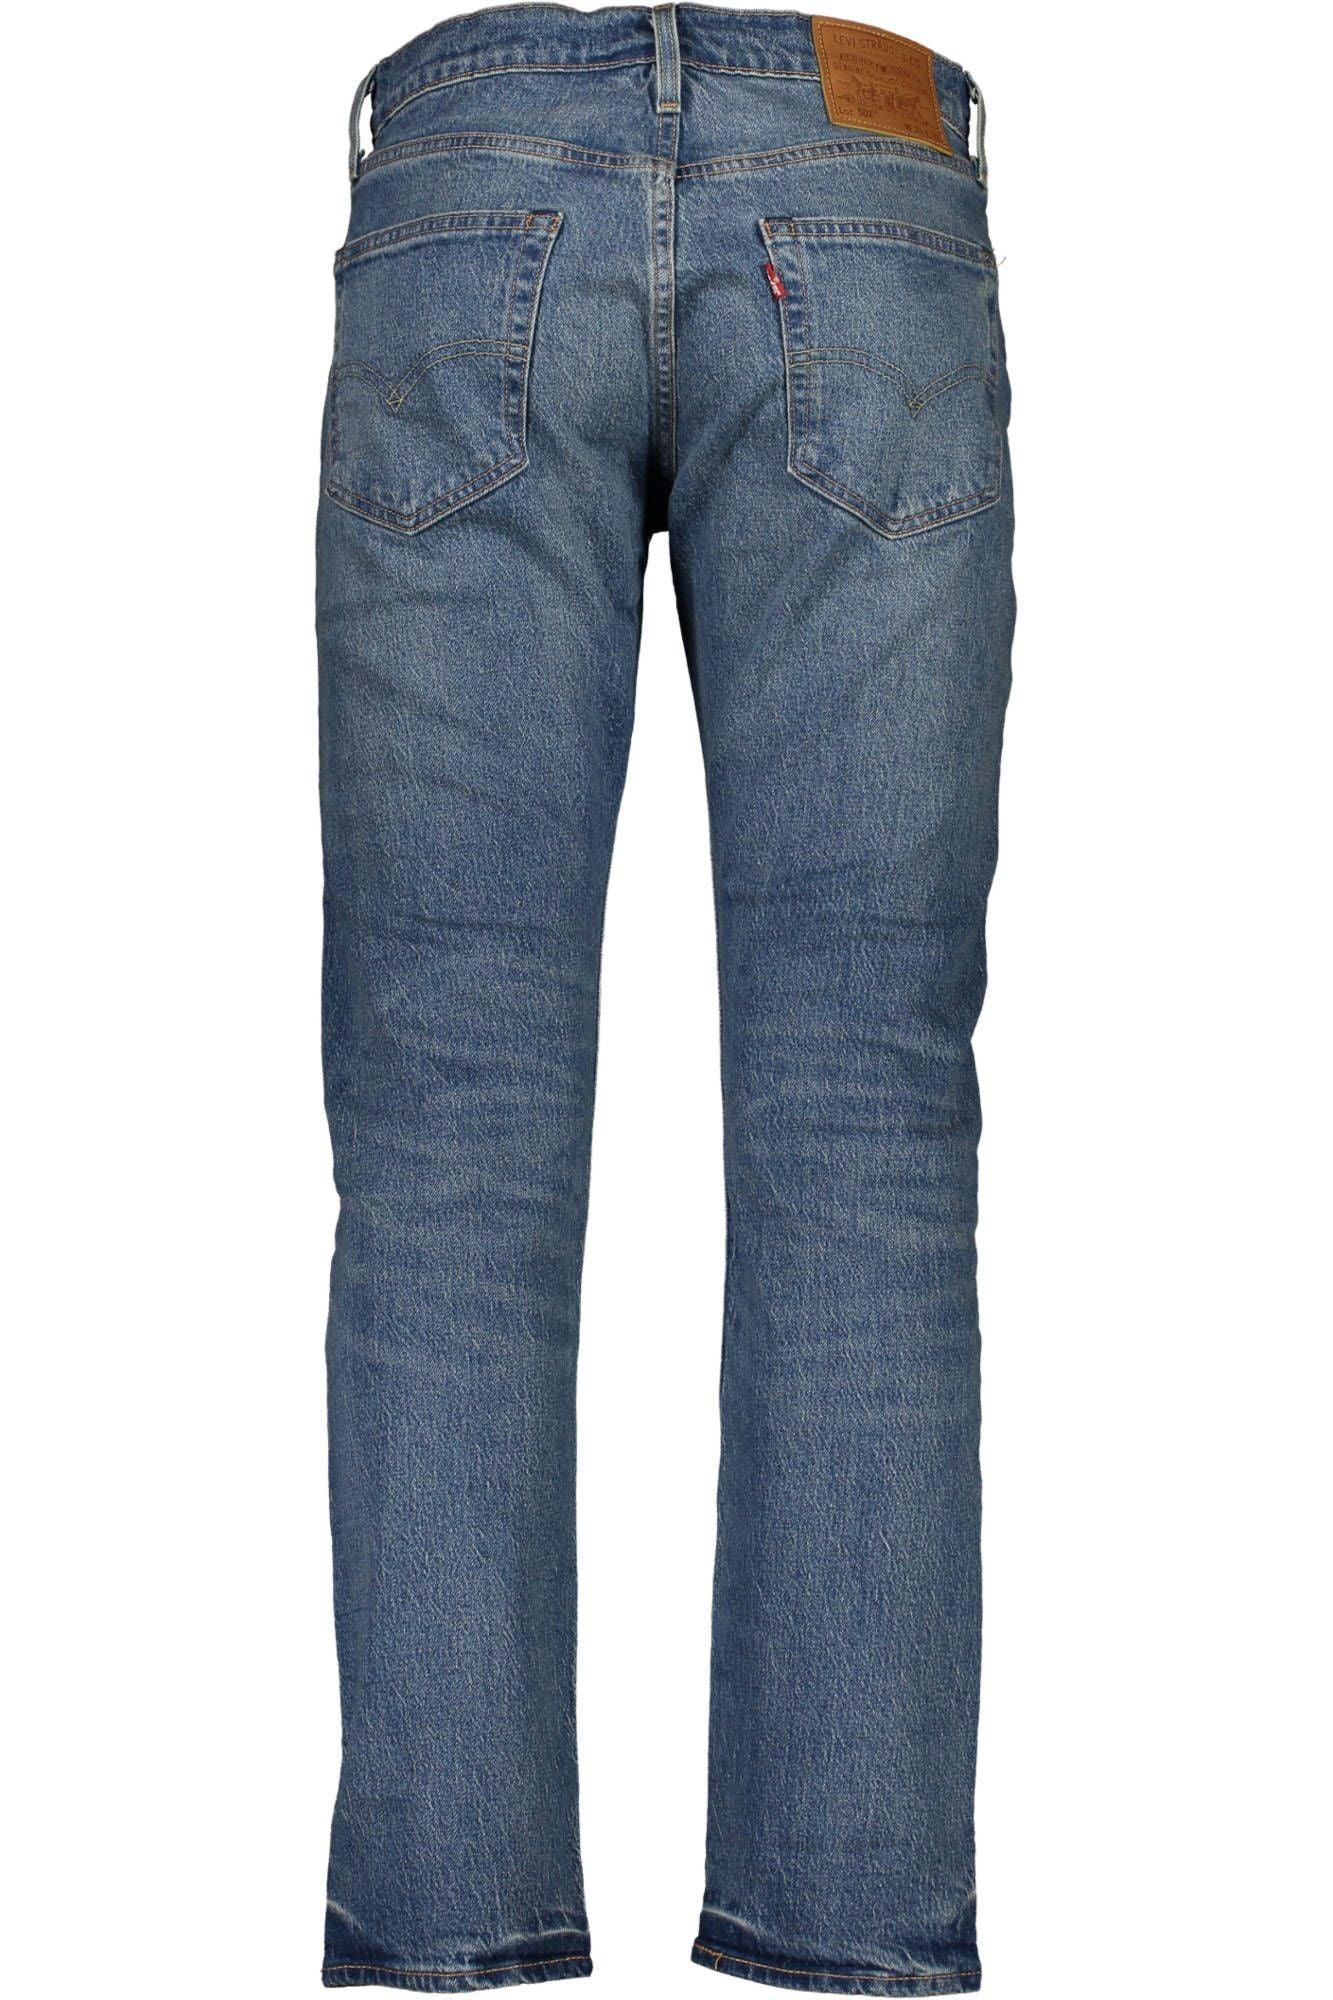 Levi's Timeless Tapered Fit Blue Jeans - PER.FASHION